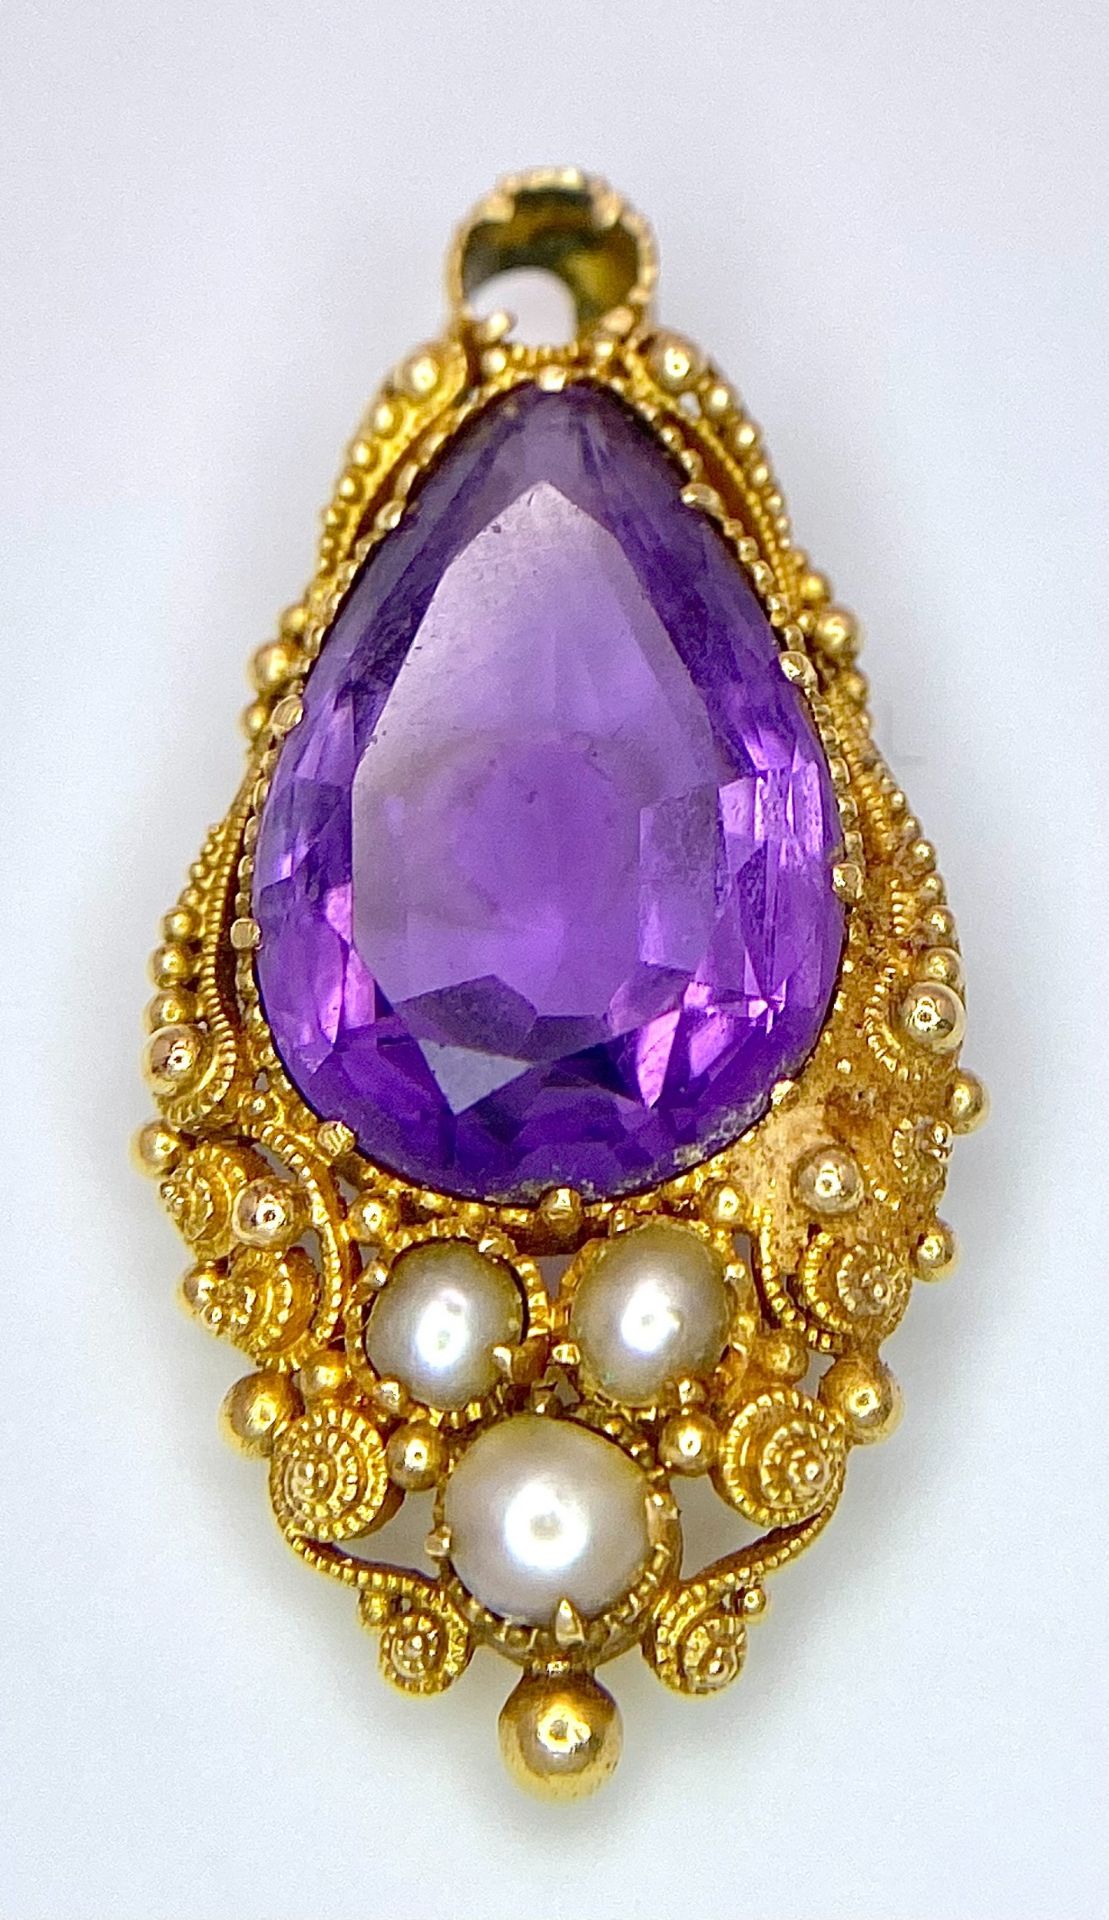 An Antique 18K Gold (tests as) Amethyst and Seed Pearl Pendant. 2.5cm. 3.3g total weight. - Image 2 of 4